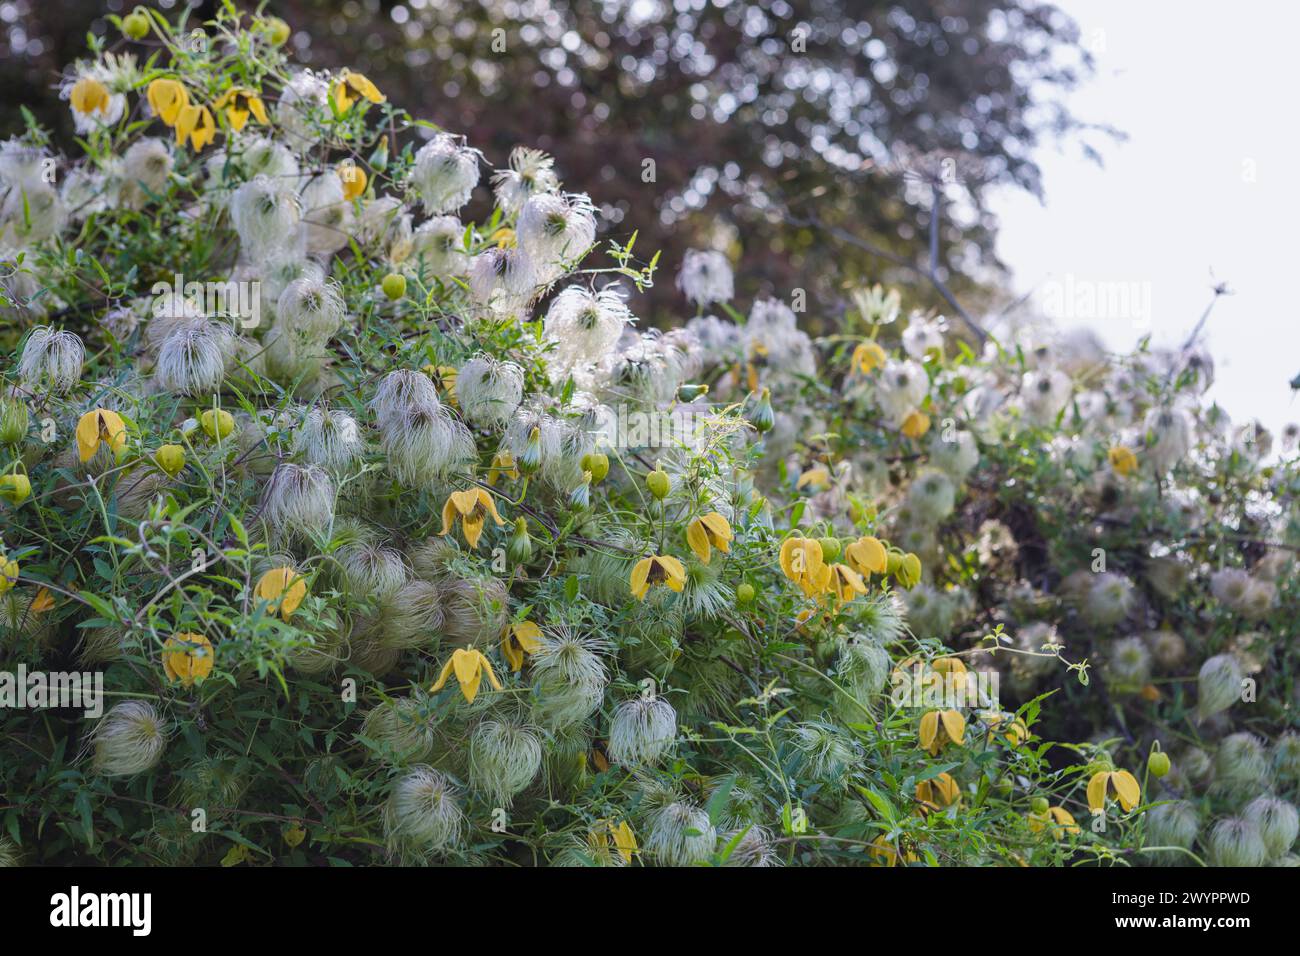 Clematis tangutica / Clematis orientalis var. tangutica / golden clematis with flowers and seedheads, climber Stock Photo